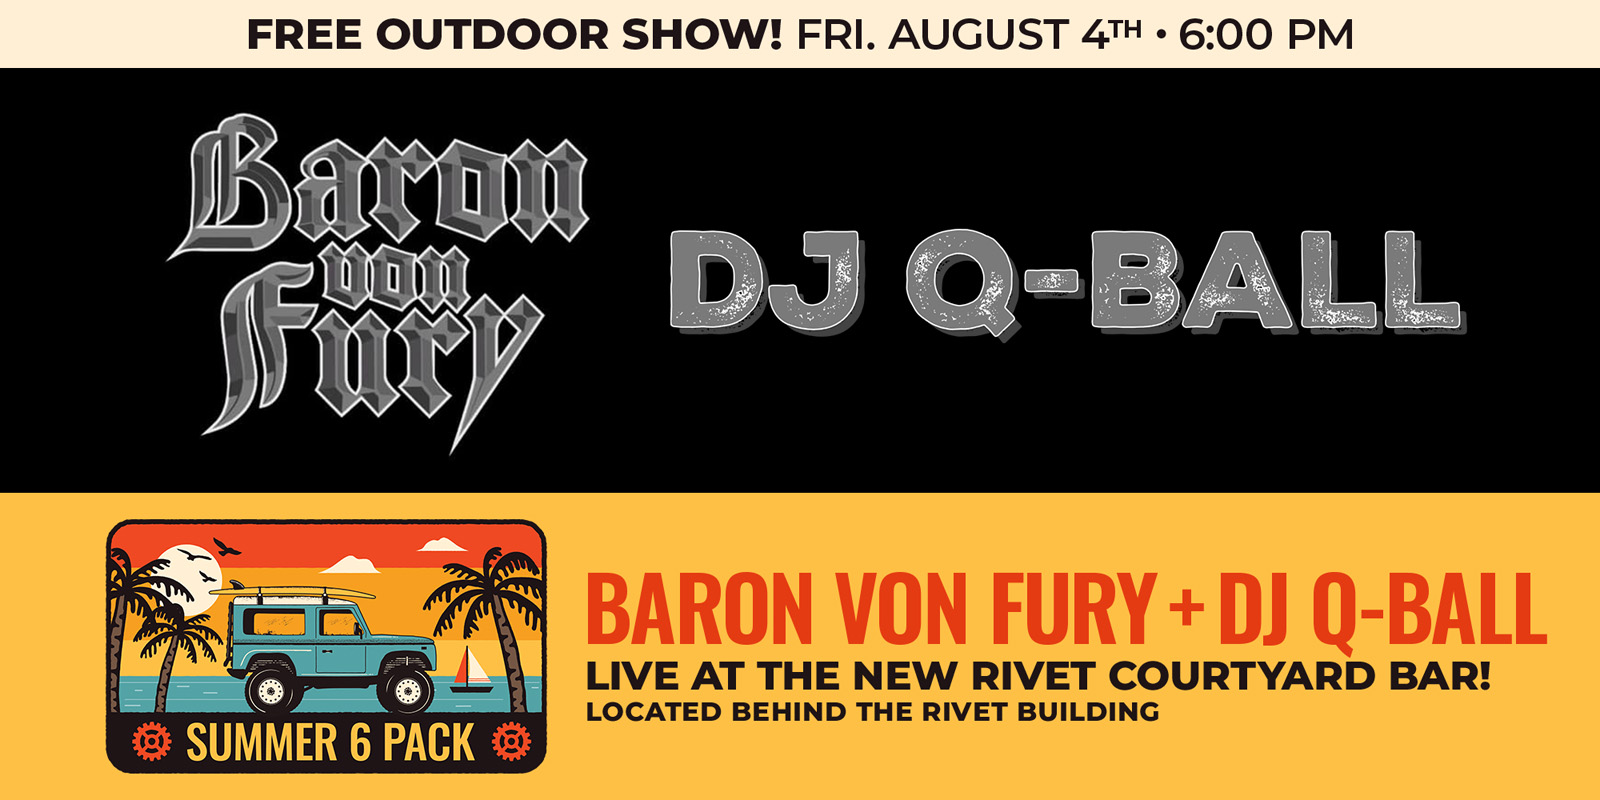 Join us for the Rivet Free Outdoor Series featuring BARON VON FURY + DJ Q-BALL live on our Courtyard Bar Stage! Admission is free and there's also free parking available. The bar opens at 6 PM and the music will play from 7 to 10 PM. Be there!